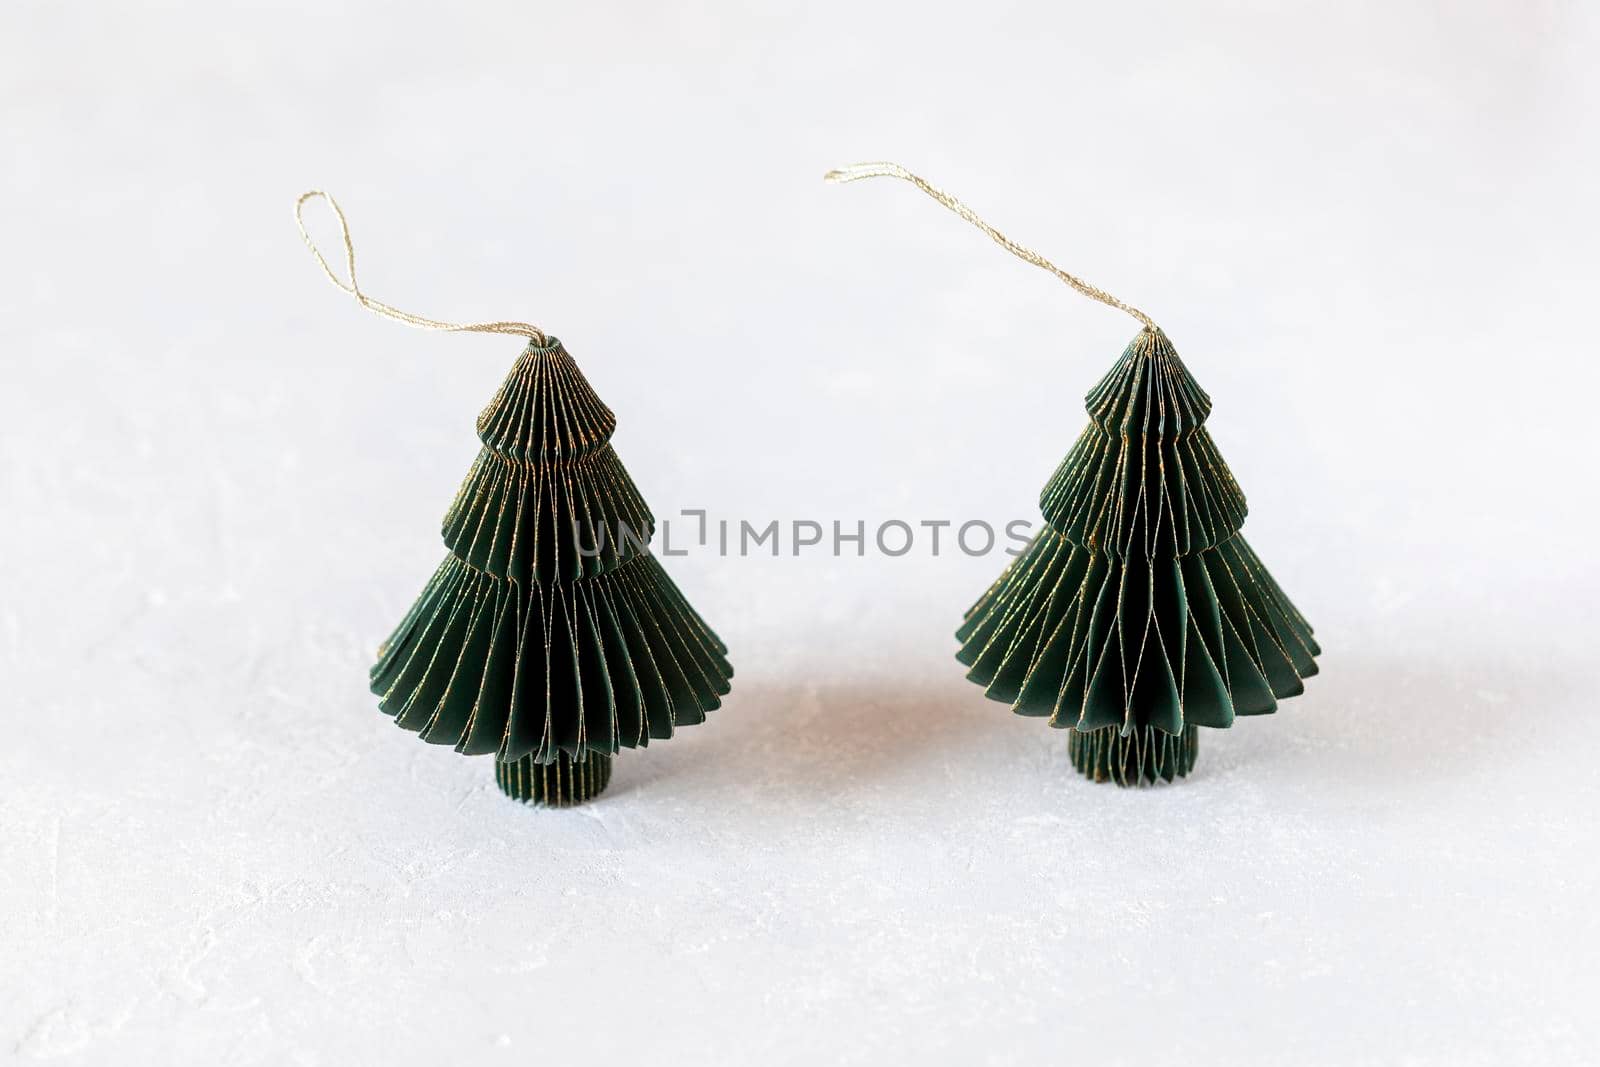 New Year and Christmas paper green and golden decorative trees, zero waste concept